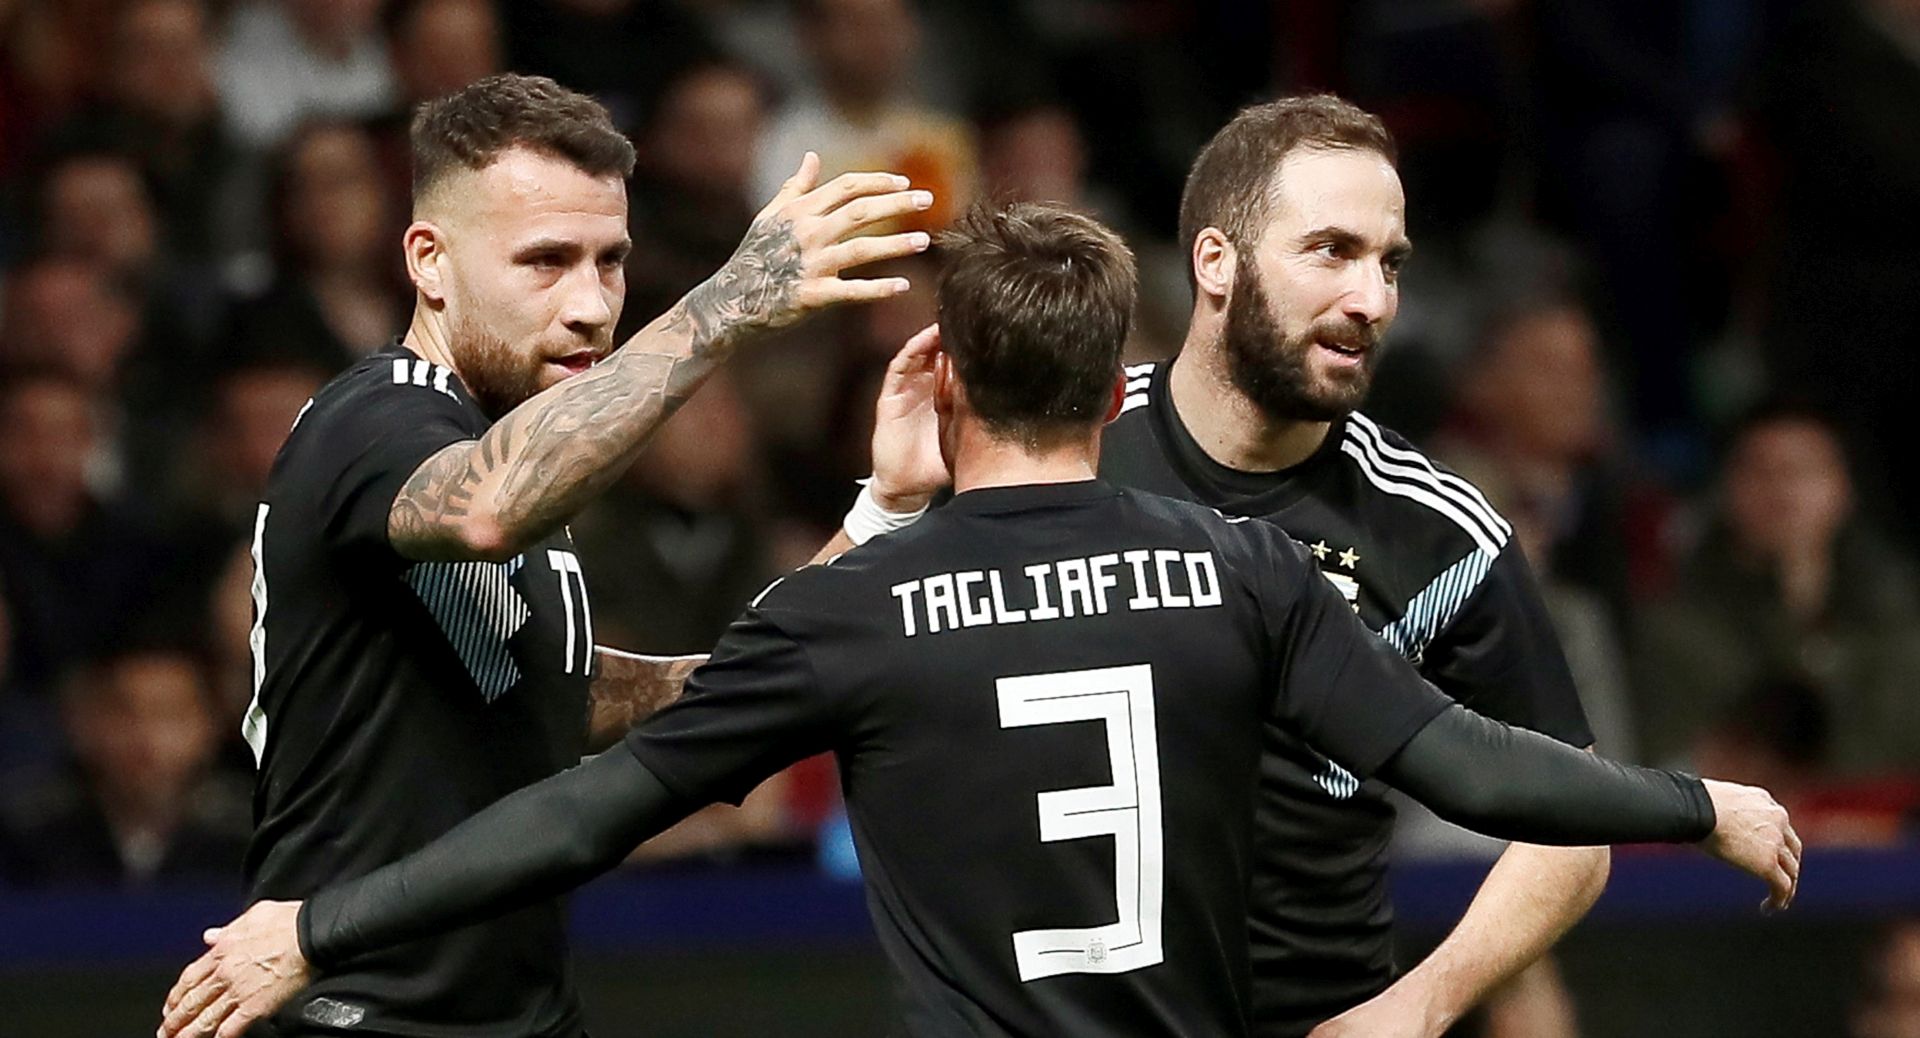 epa06633149 Argentina's Nicolas Otamendi (L) celebrates with teammates after scoring a goal during an international friendly soccer match between Argentina and Spain at Wanda Metropolitano stadium in Madrid, Spain, 27 March 2018.  EPA/MARISCAL